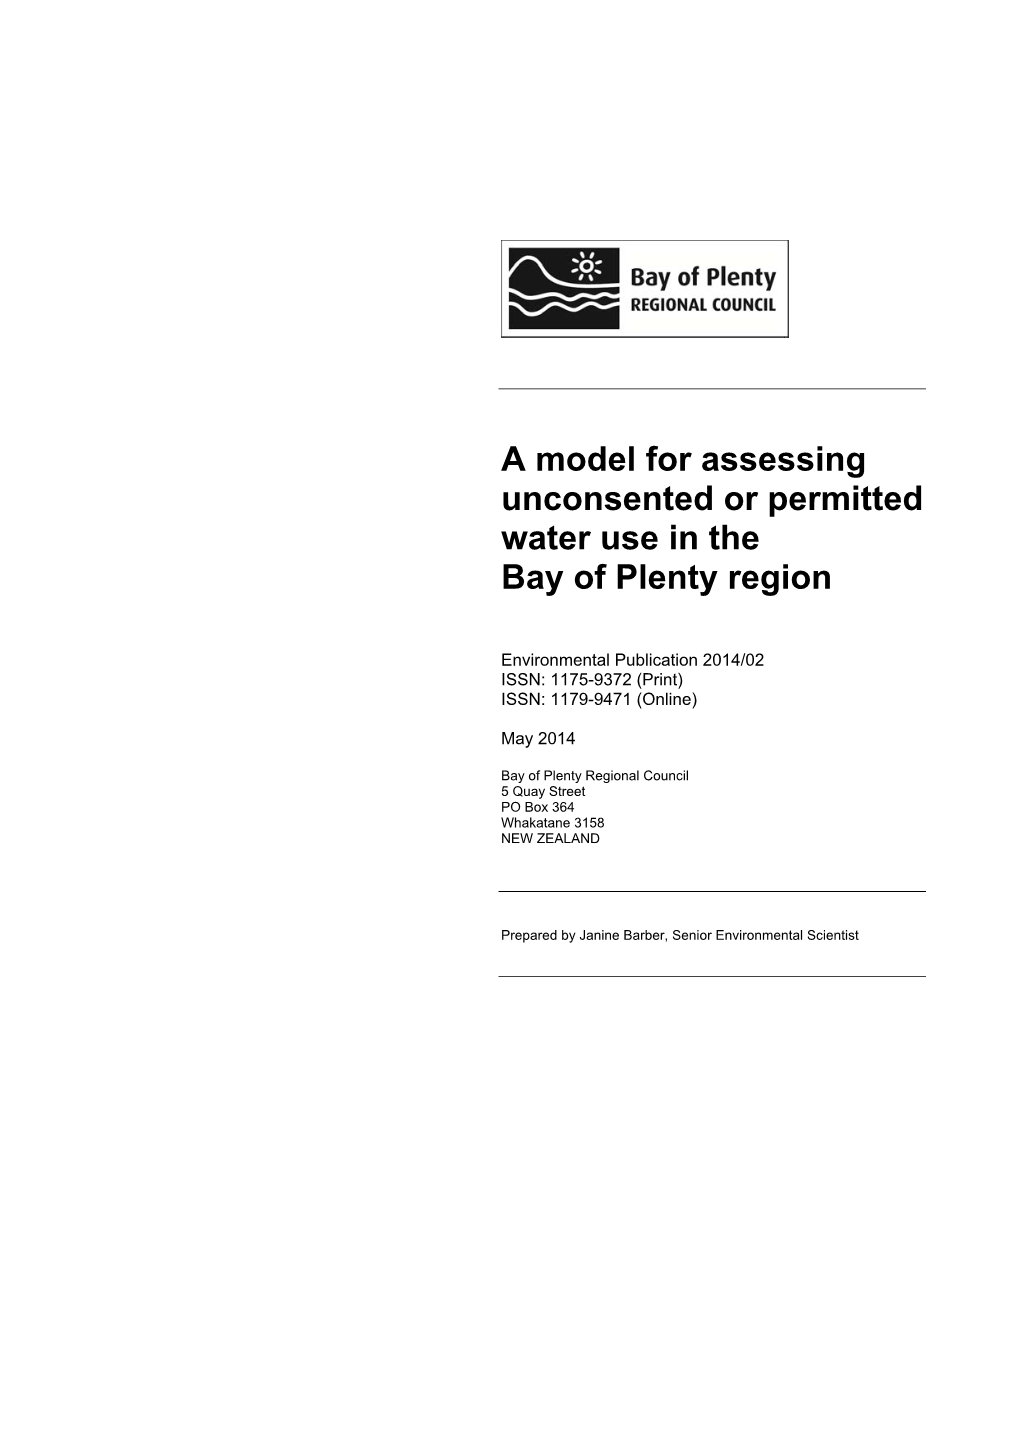 A Model for Assessing Unconsented Or Permitted Water Use in the Bay of Plenty Region